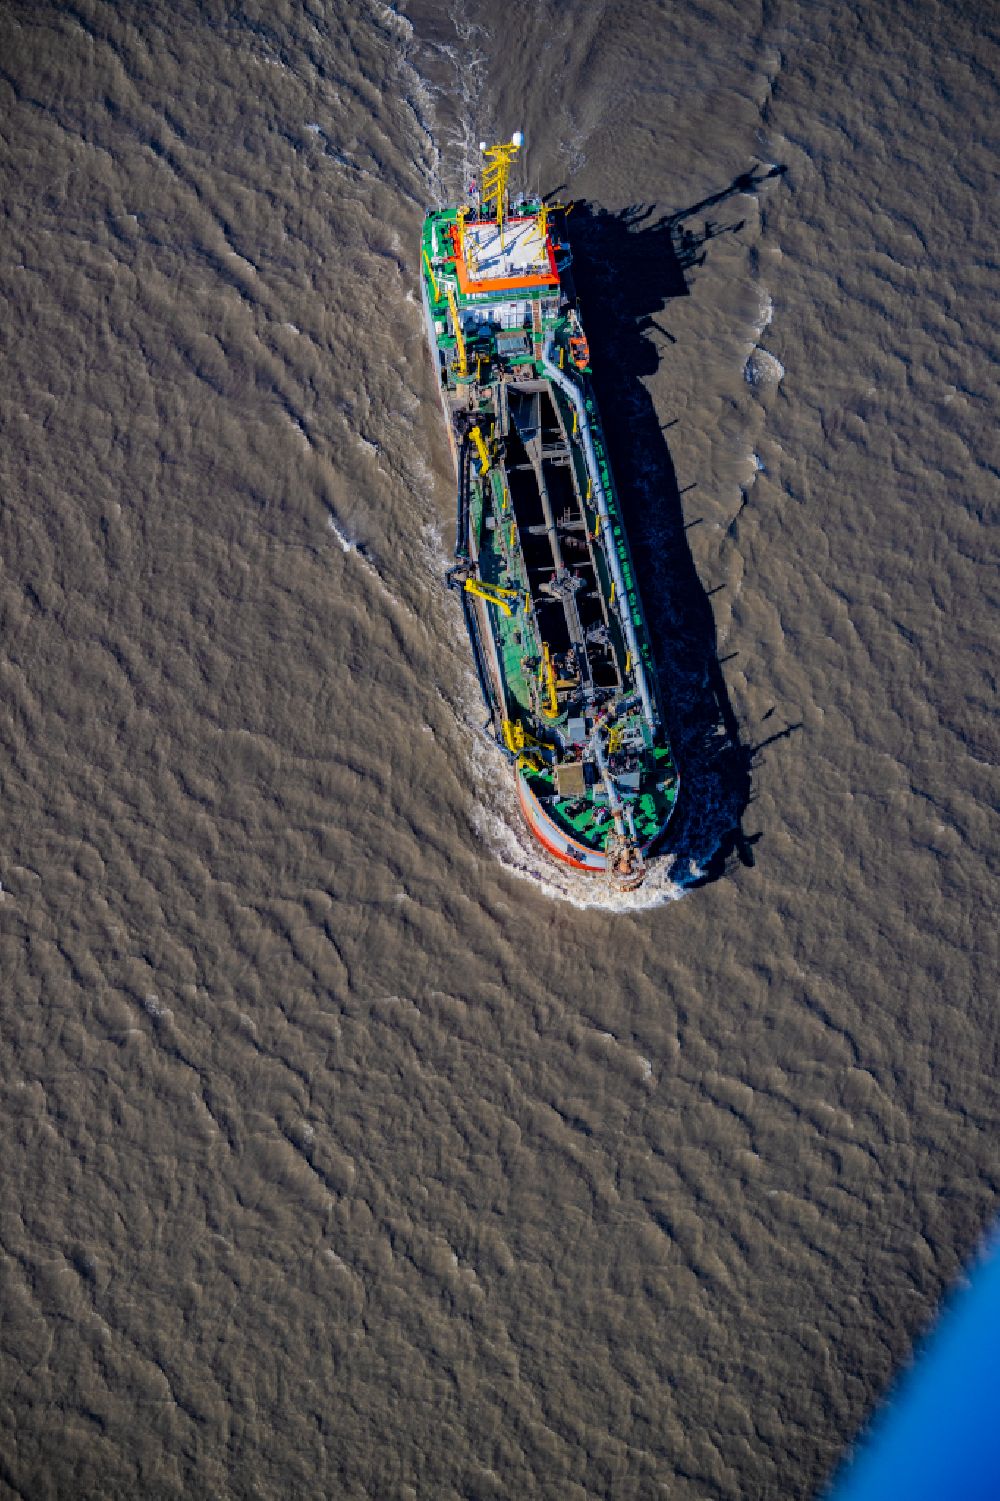 Balje from the bird's eye view: Ship - special ship in motion Suction dredger ship Amazone (IMO number: 9158630) in motion on the Elbe in Balje in the state Lower Saxony, Germany